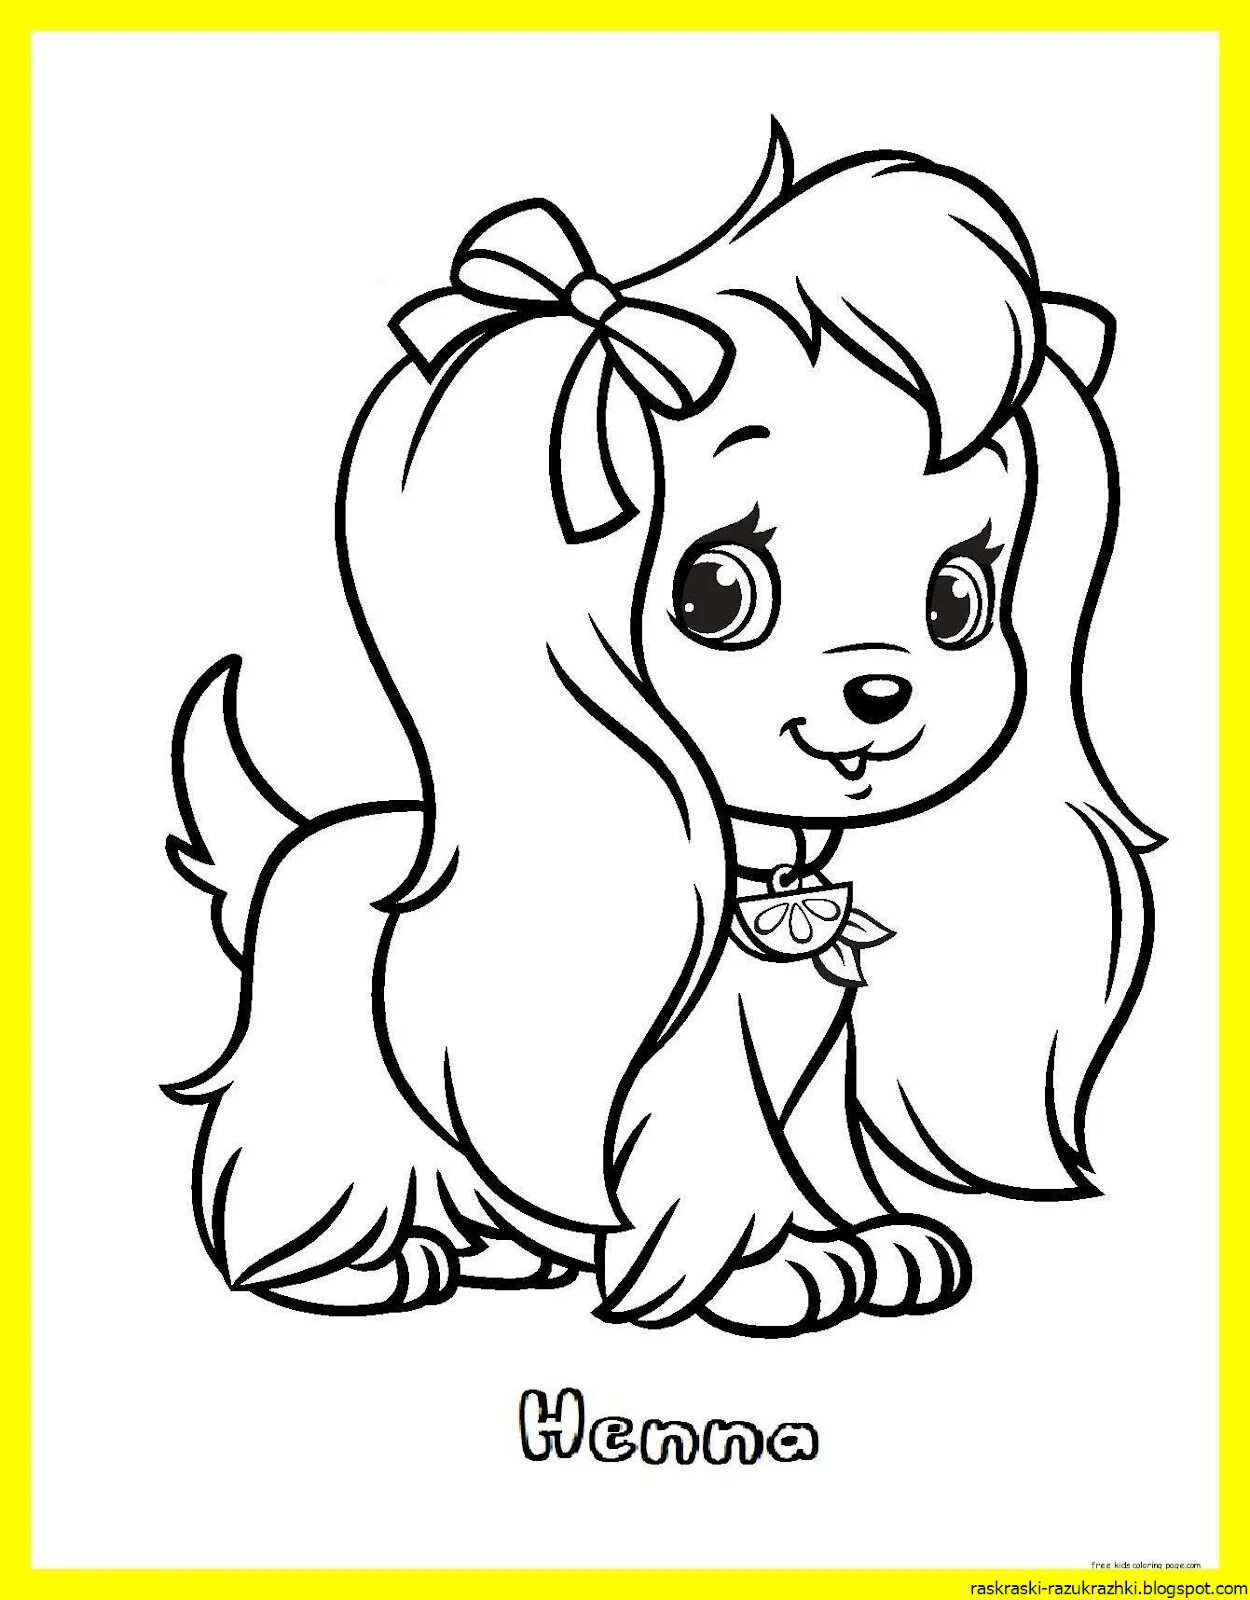 Peace coloring 3 year old girls with animals